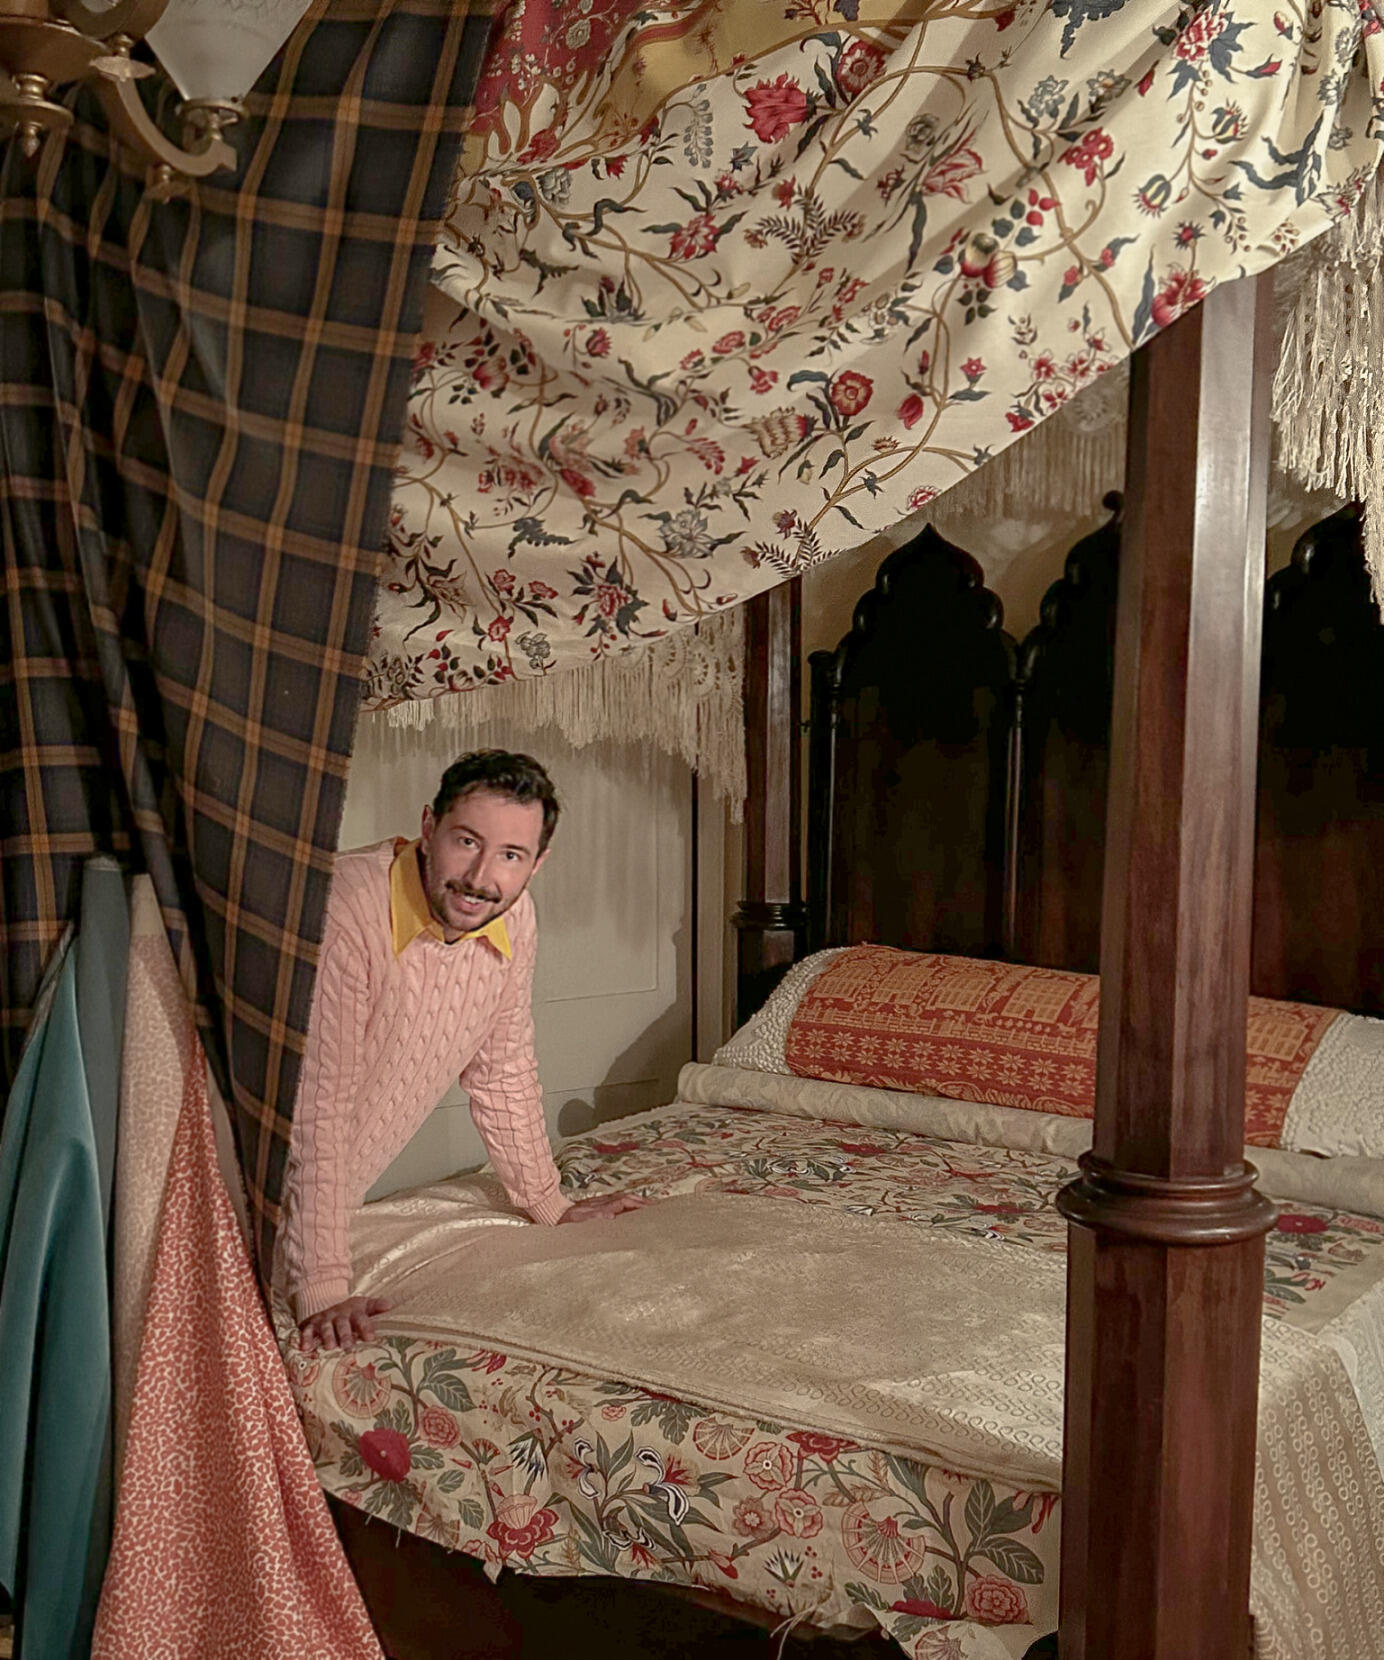 A photo of a man leaning onto the mattress of a canpoy bed